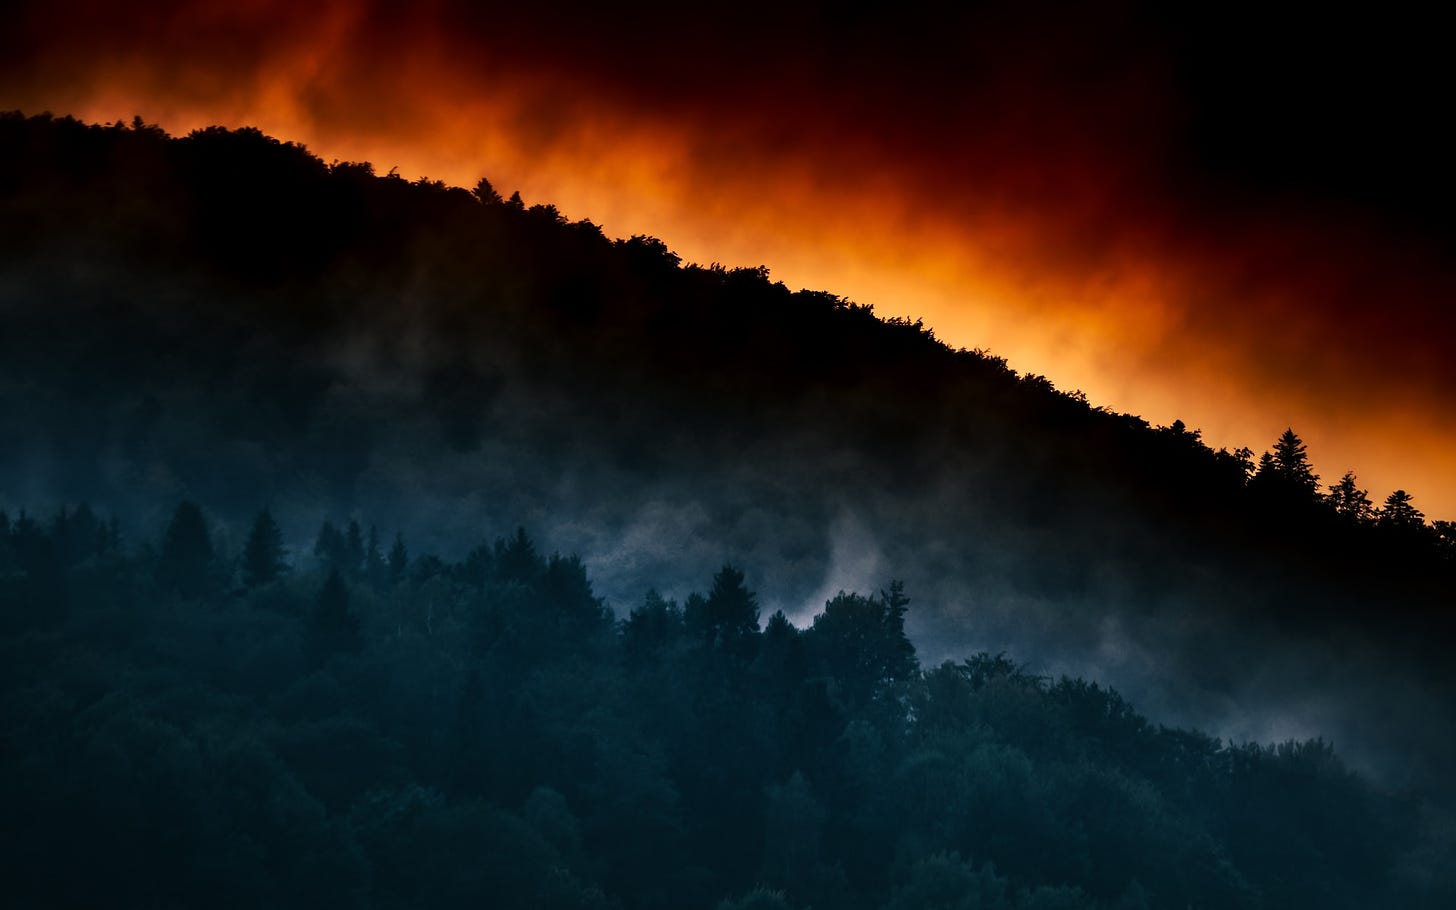 A forested hillside shrouded in smoke with red light peaking over the horizon